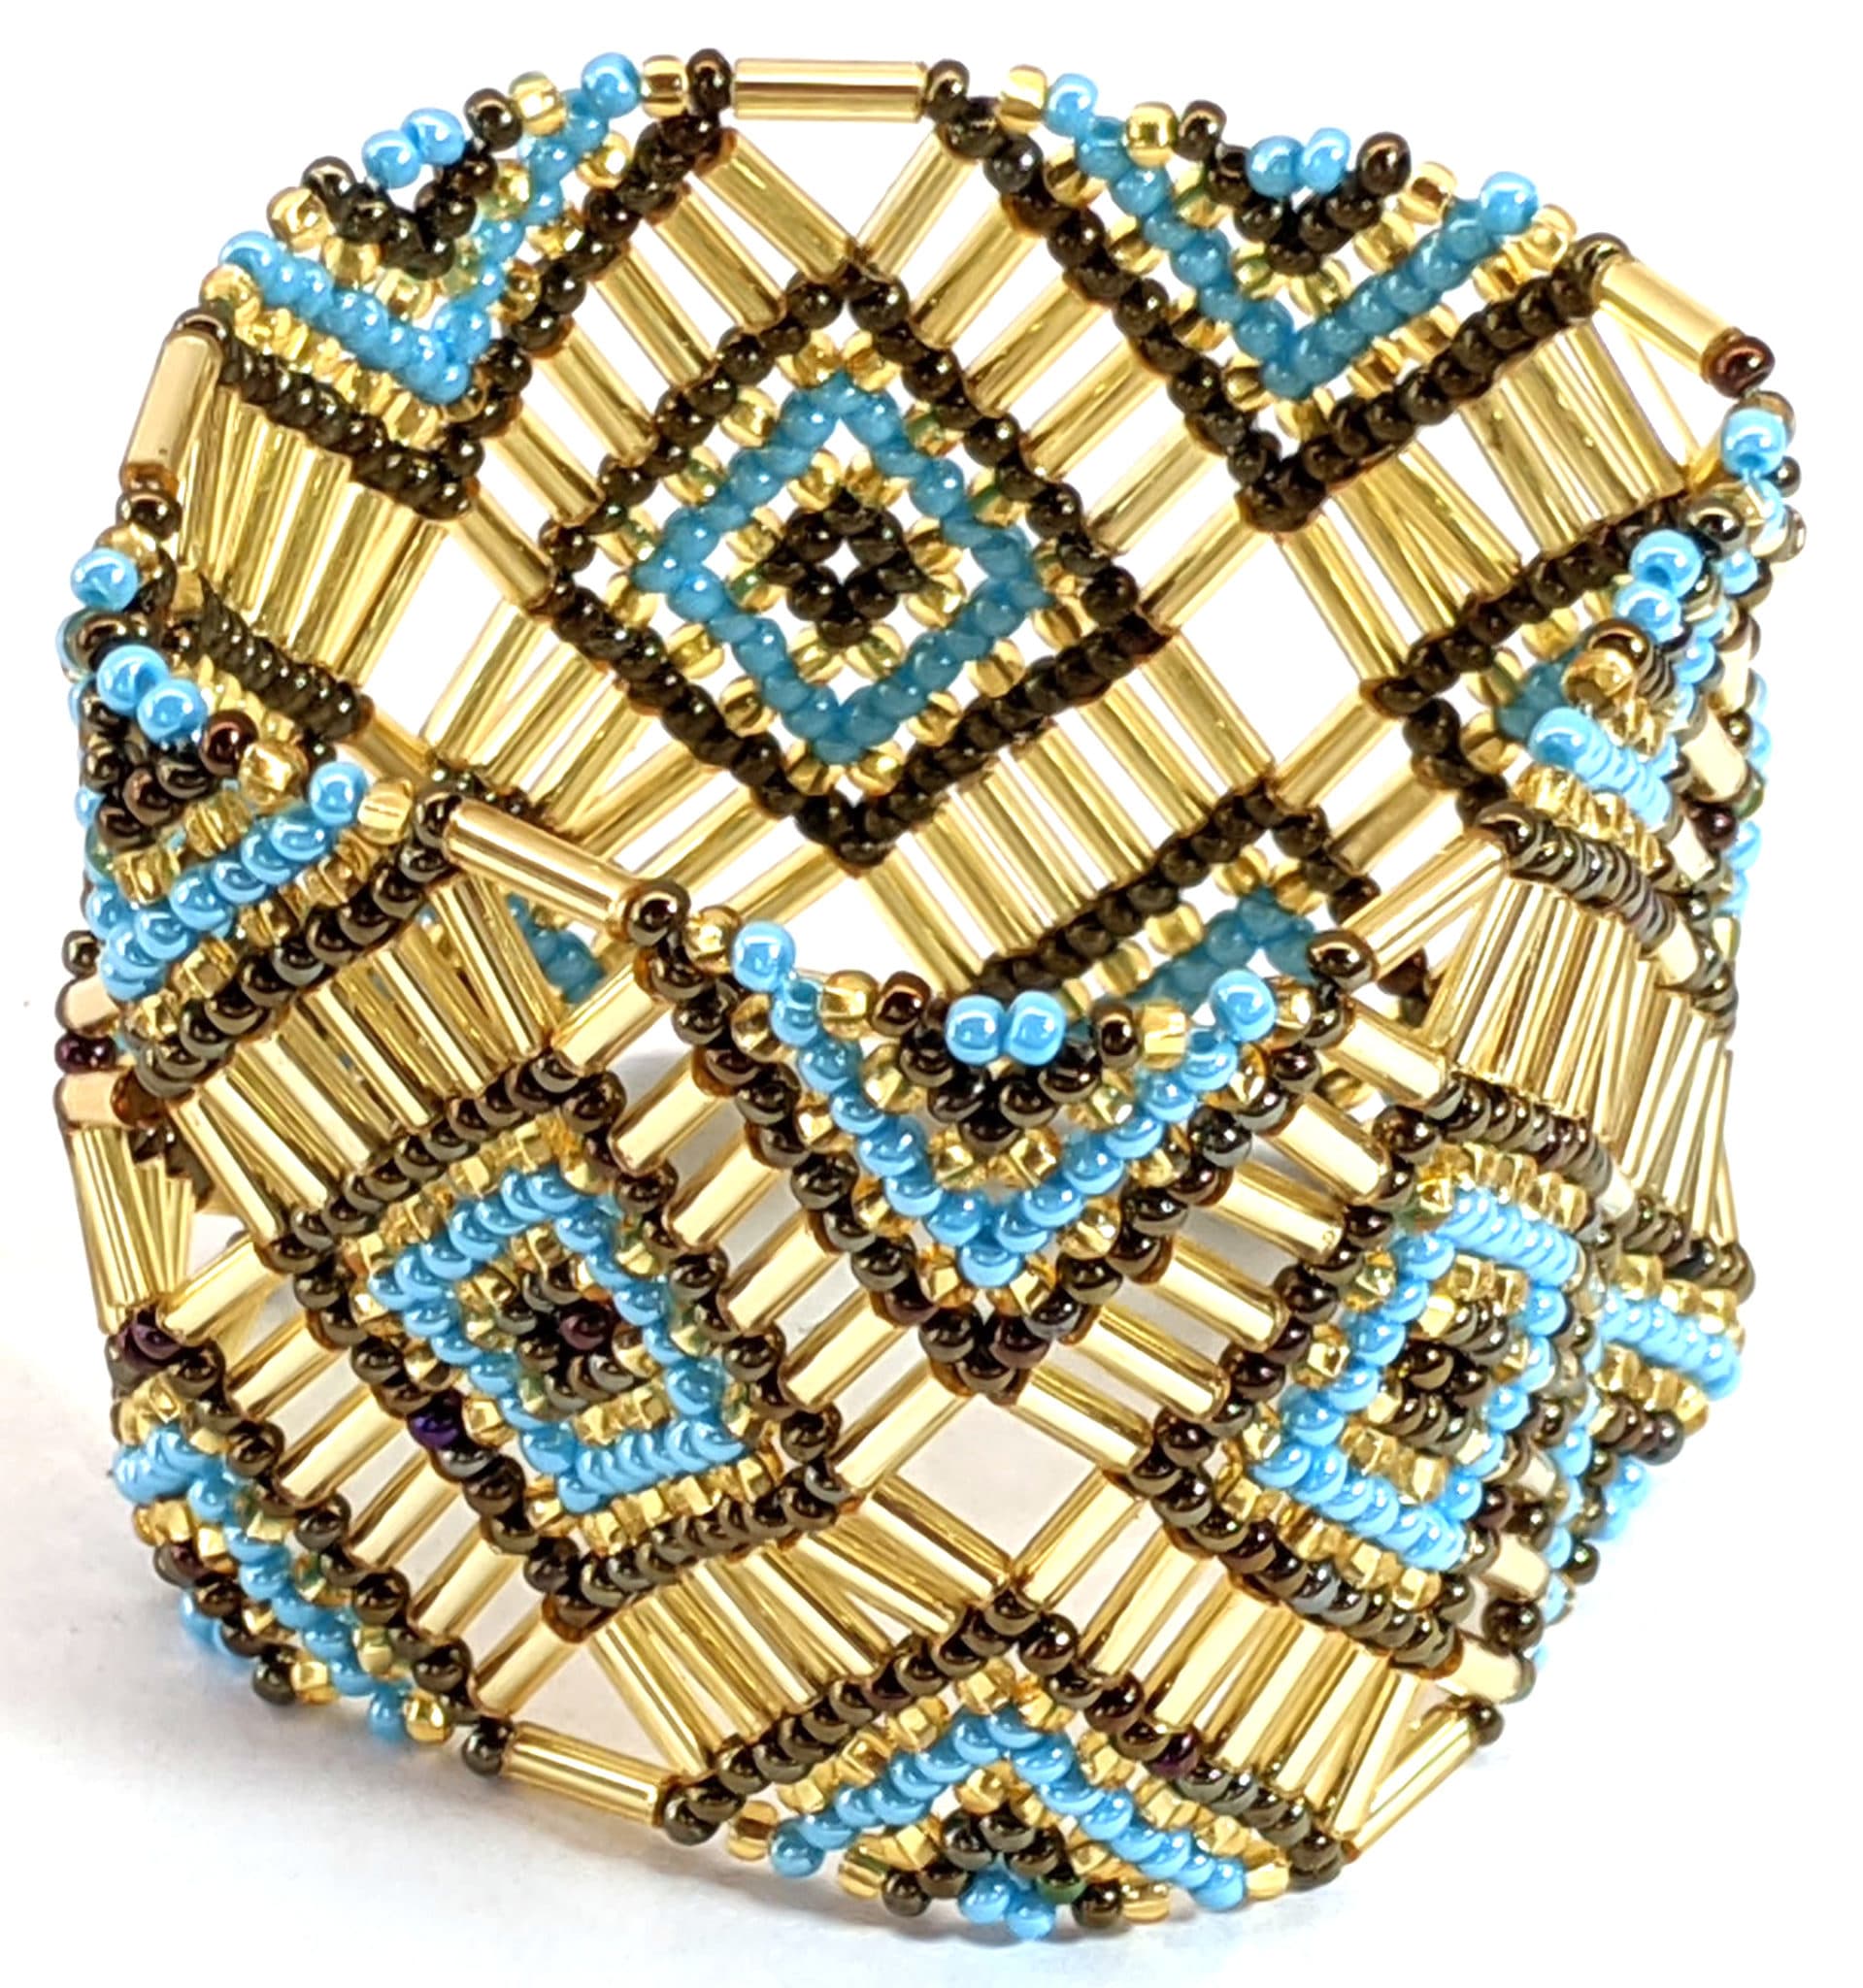 Turquoise, Copper and Gold Beaded Elastic Geometric Cuff